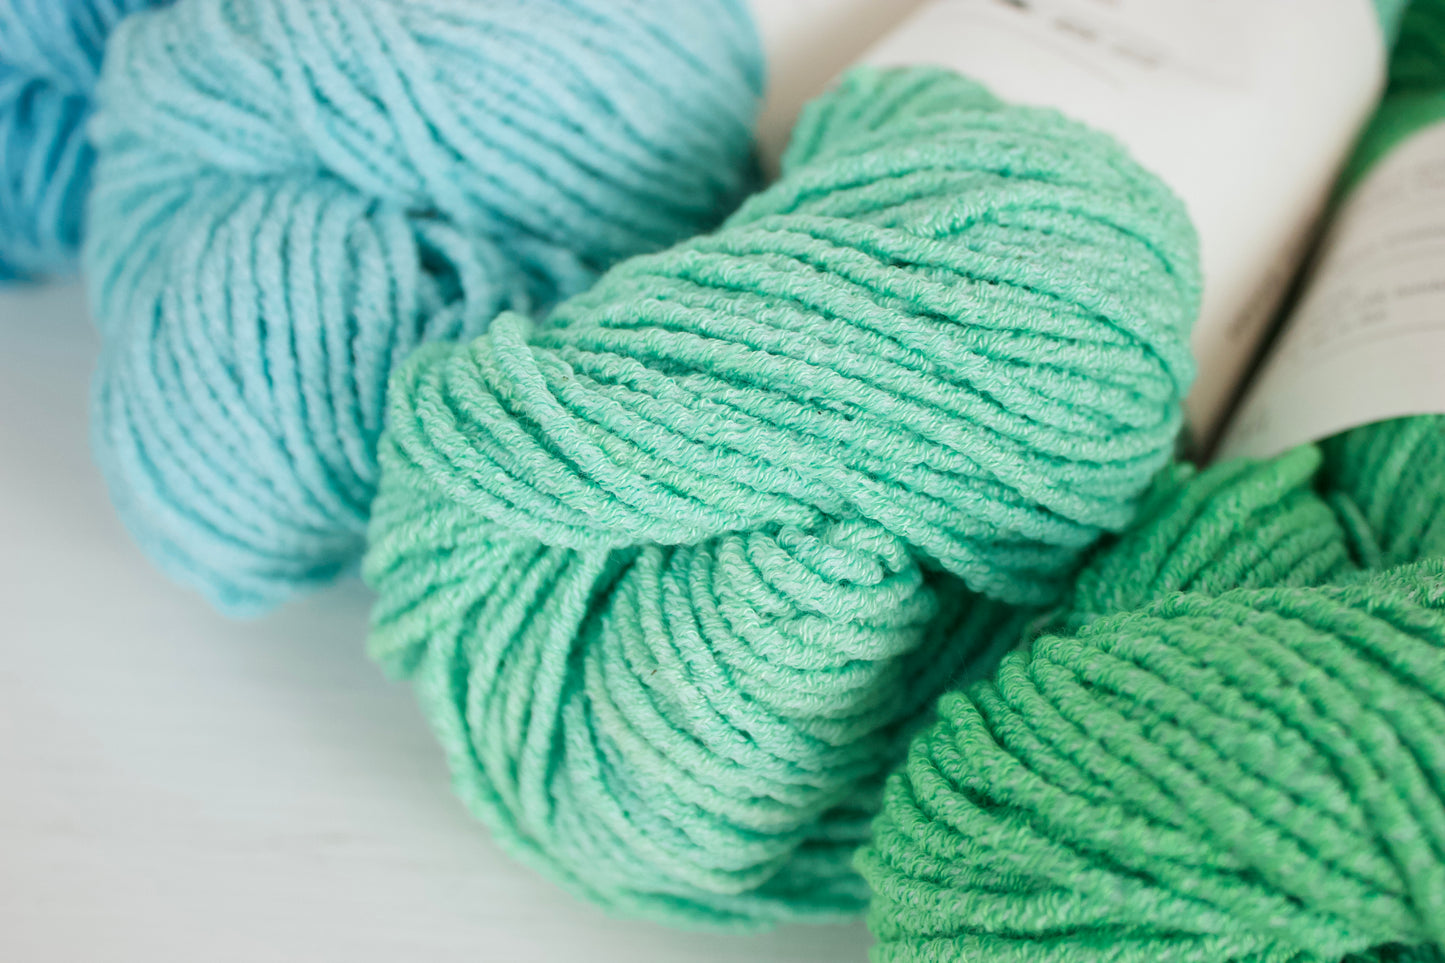 Four Skein Set A - Hyades Worsted